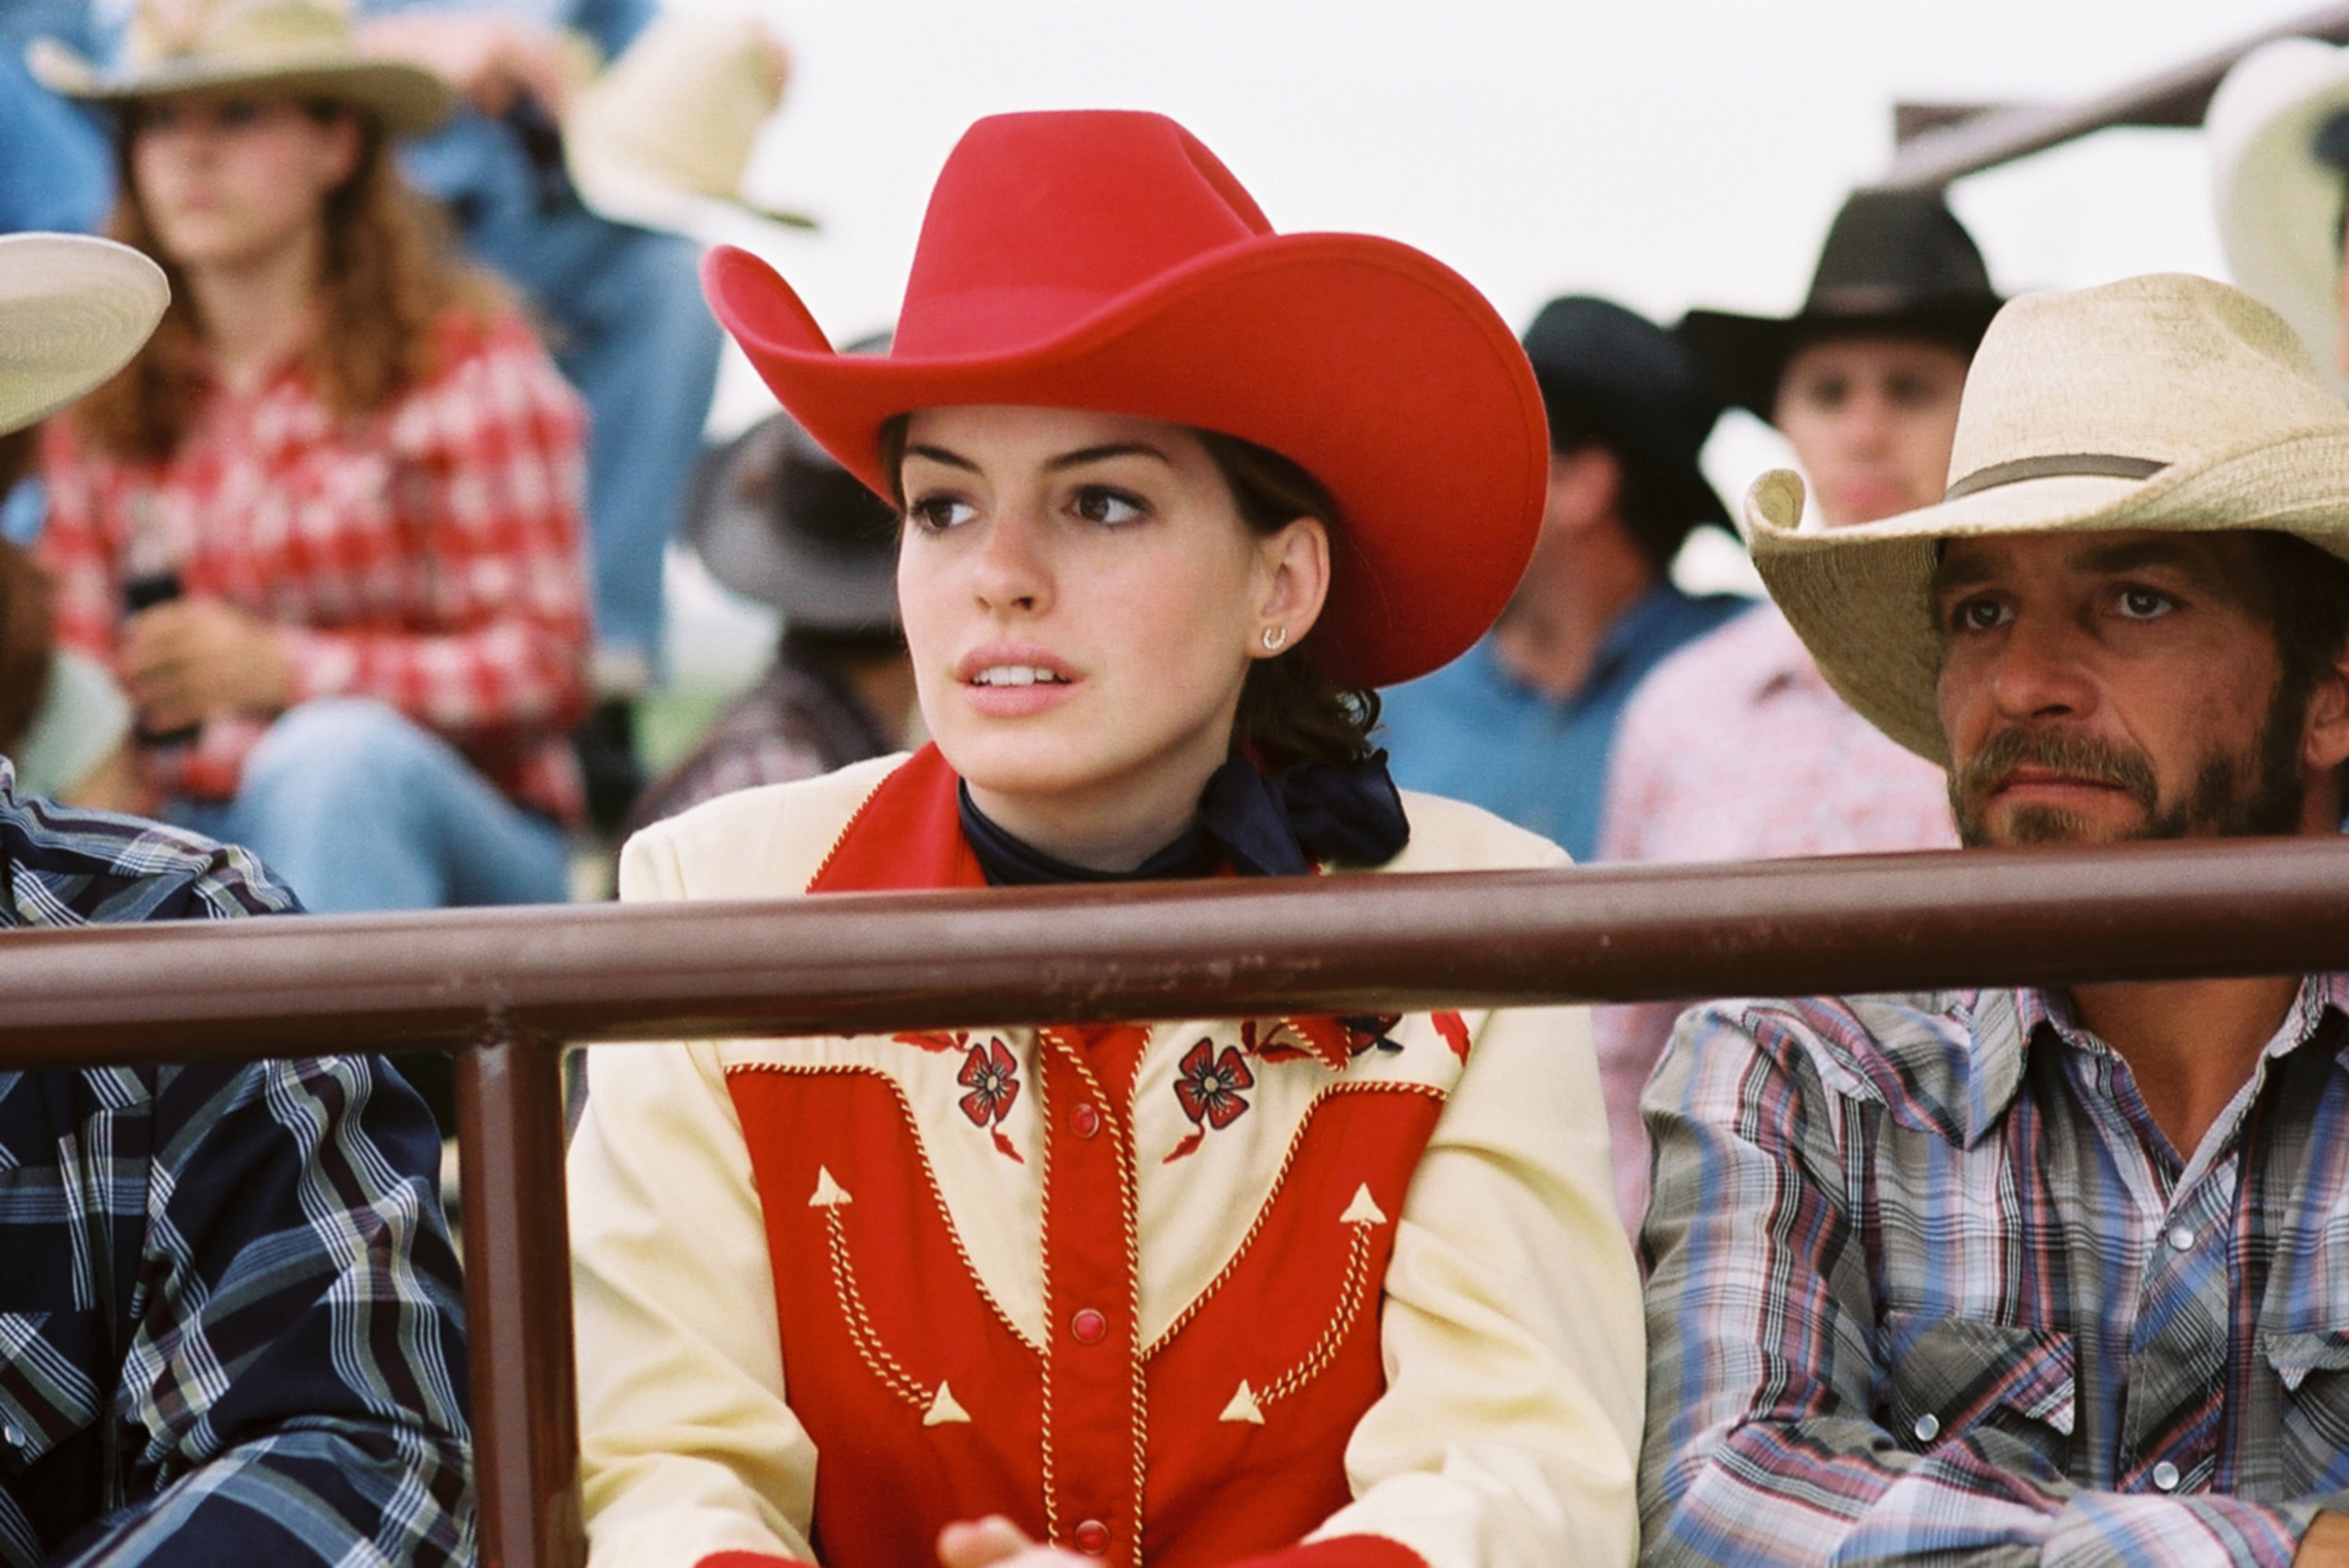 Anne Hathaway in a rodeo outfit in the movie